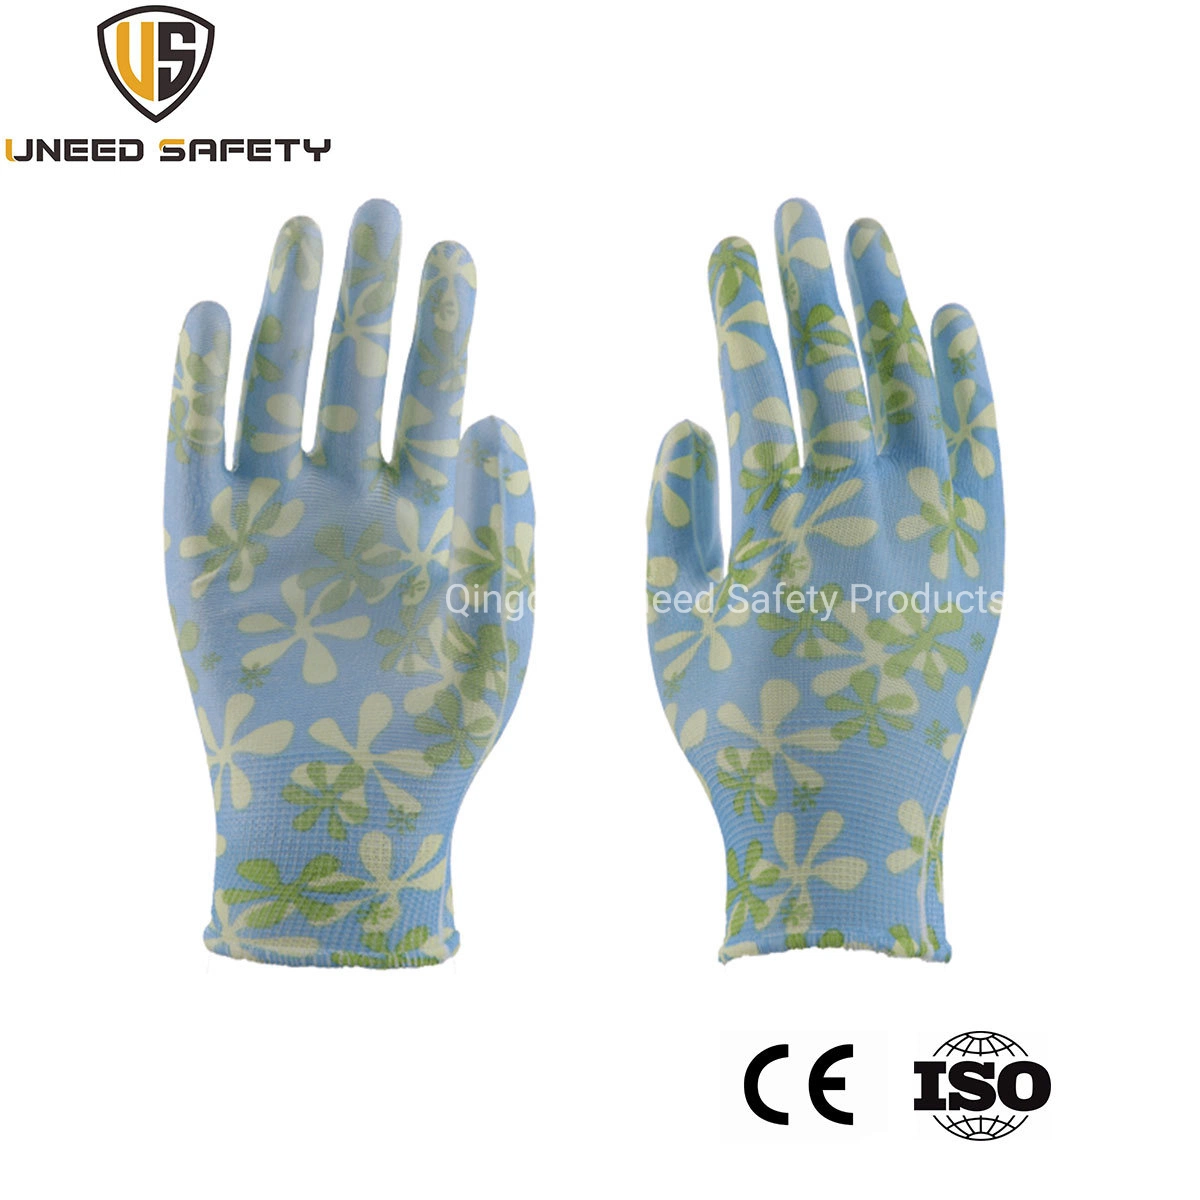 13G Hand Protect Safety Work Polyester Printing Colorful Pattern PU Coated Garden Labor Working Gloves